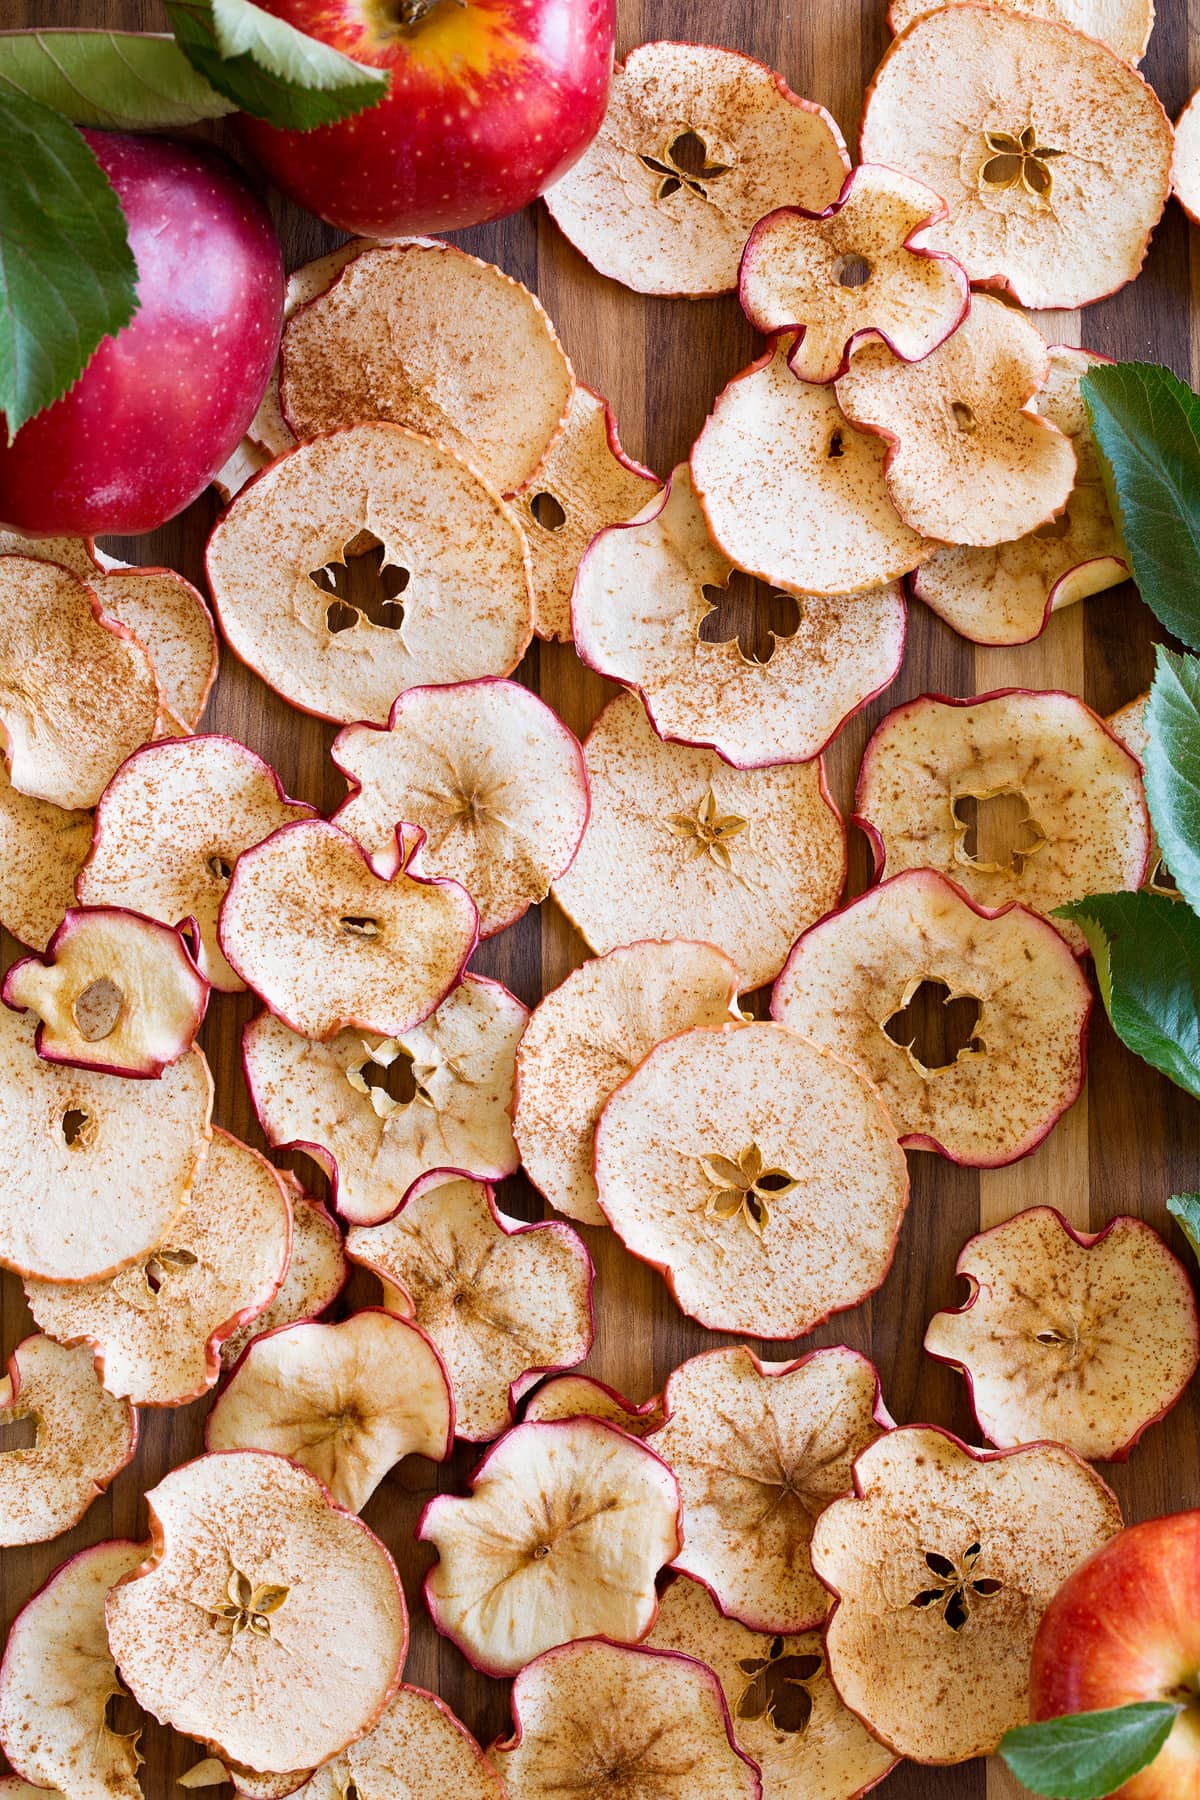 Apple chips spread out on a wooden surface.